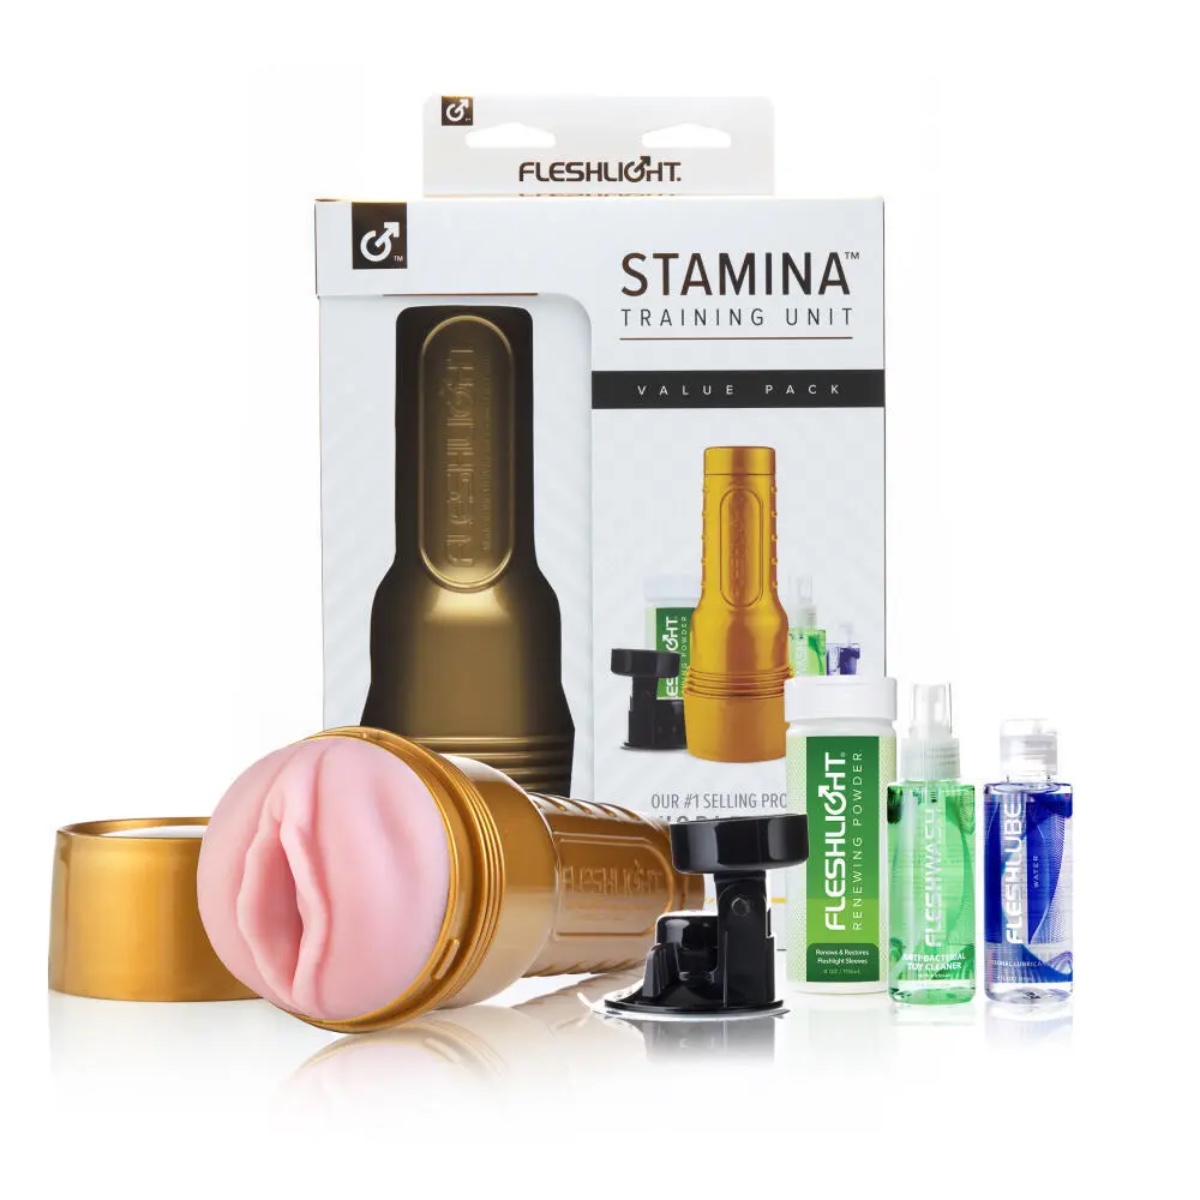 Fleshlight Accessories: Enhancing Your Experience